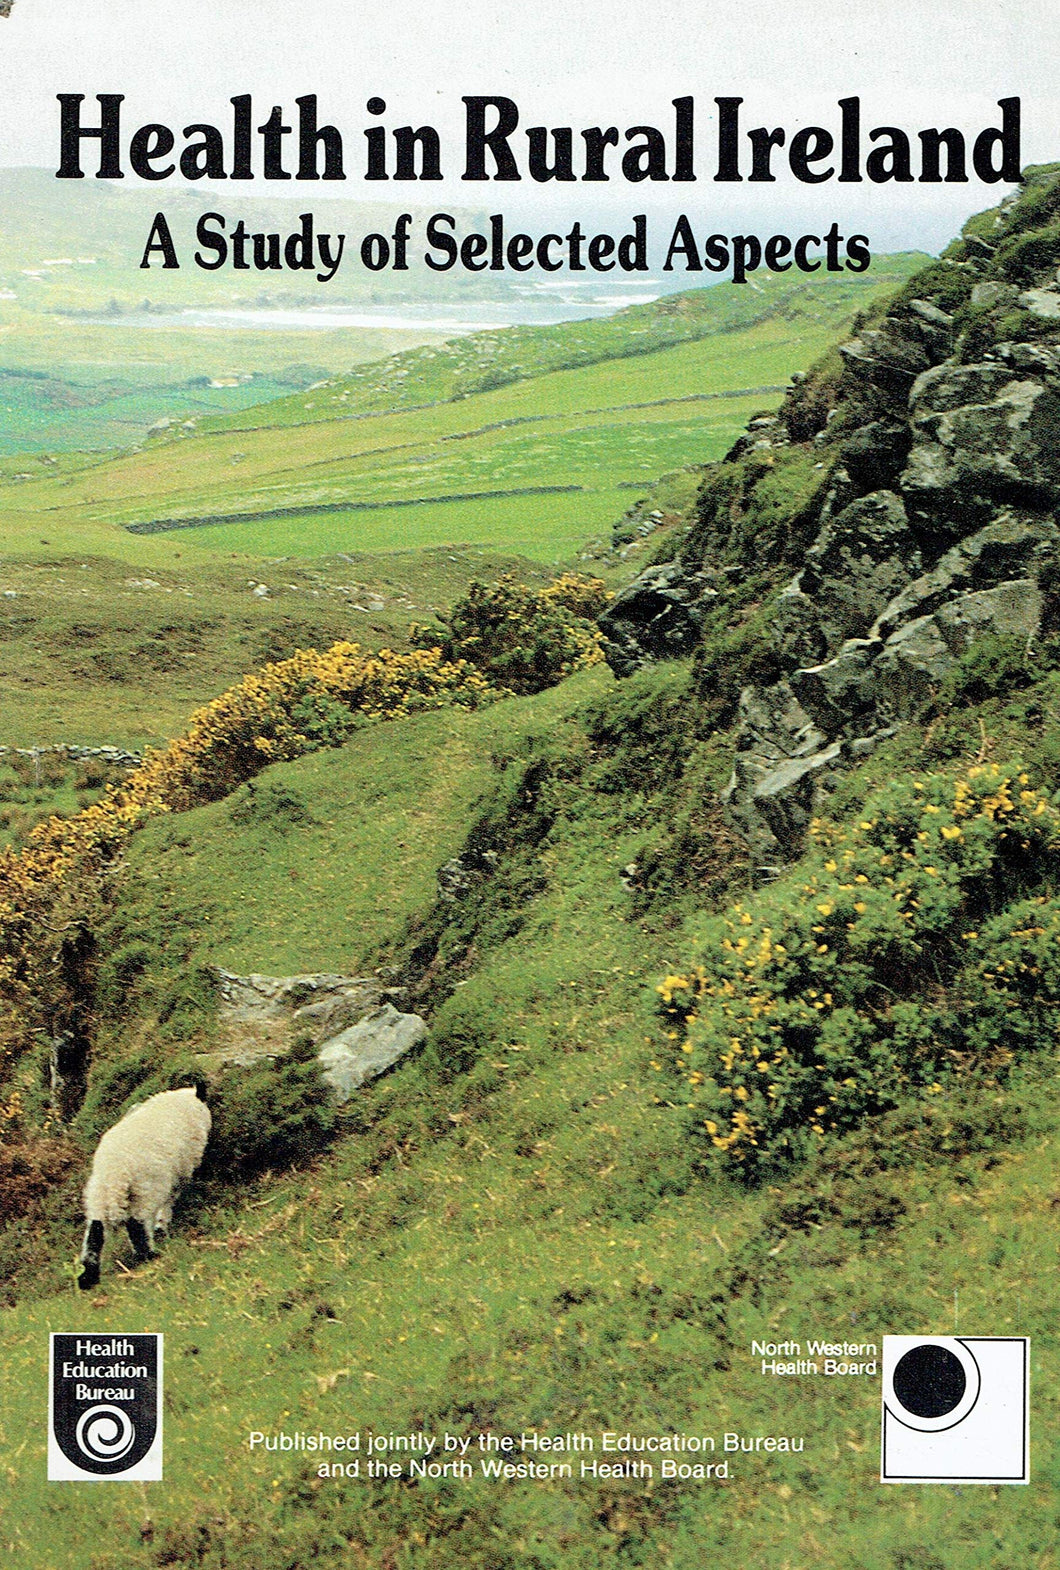 Health in rural Ireland: A study of selected aspects